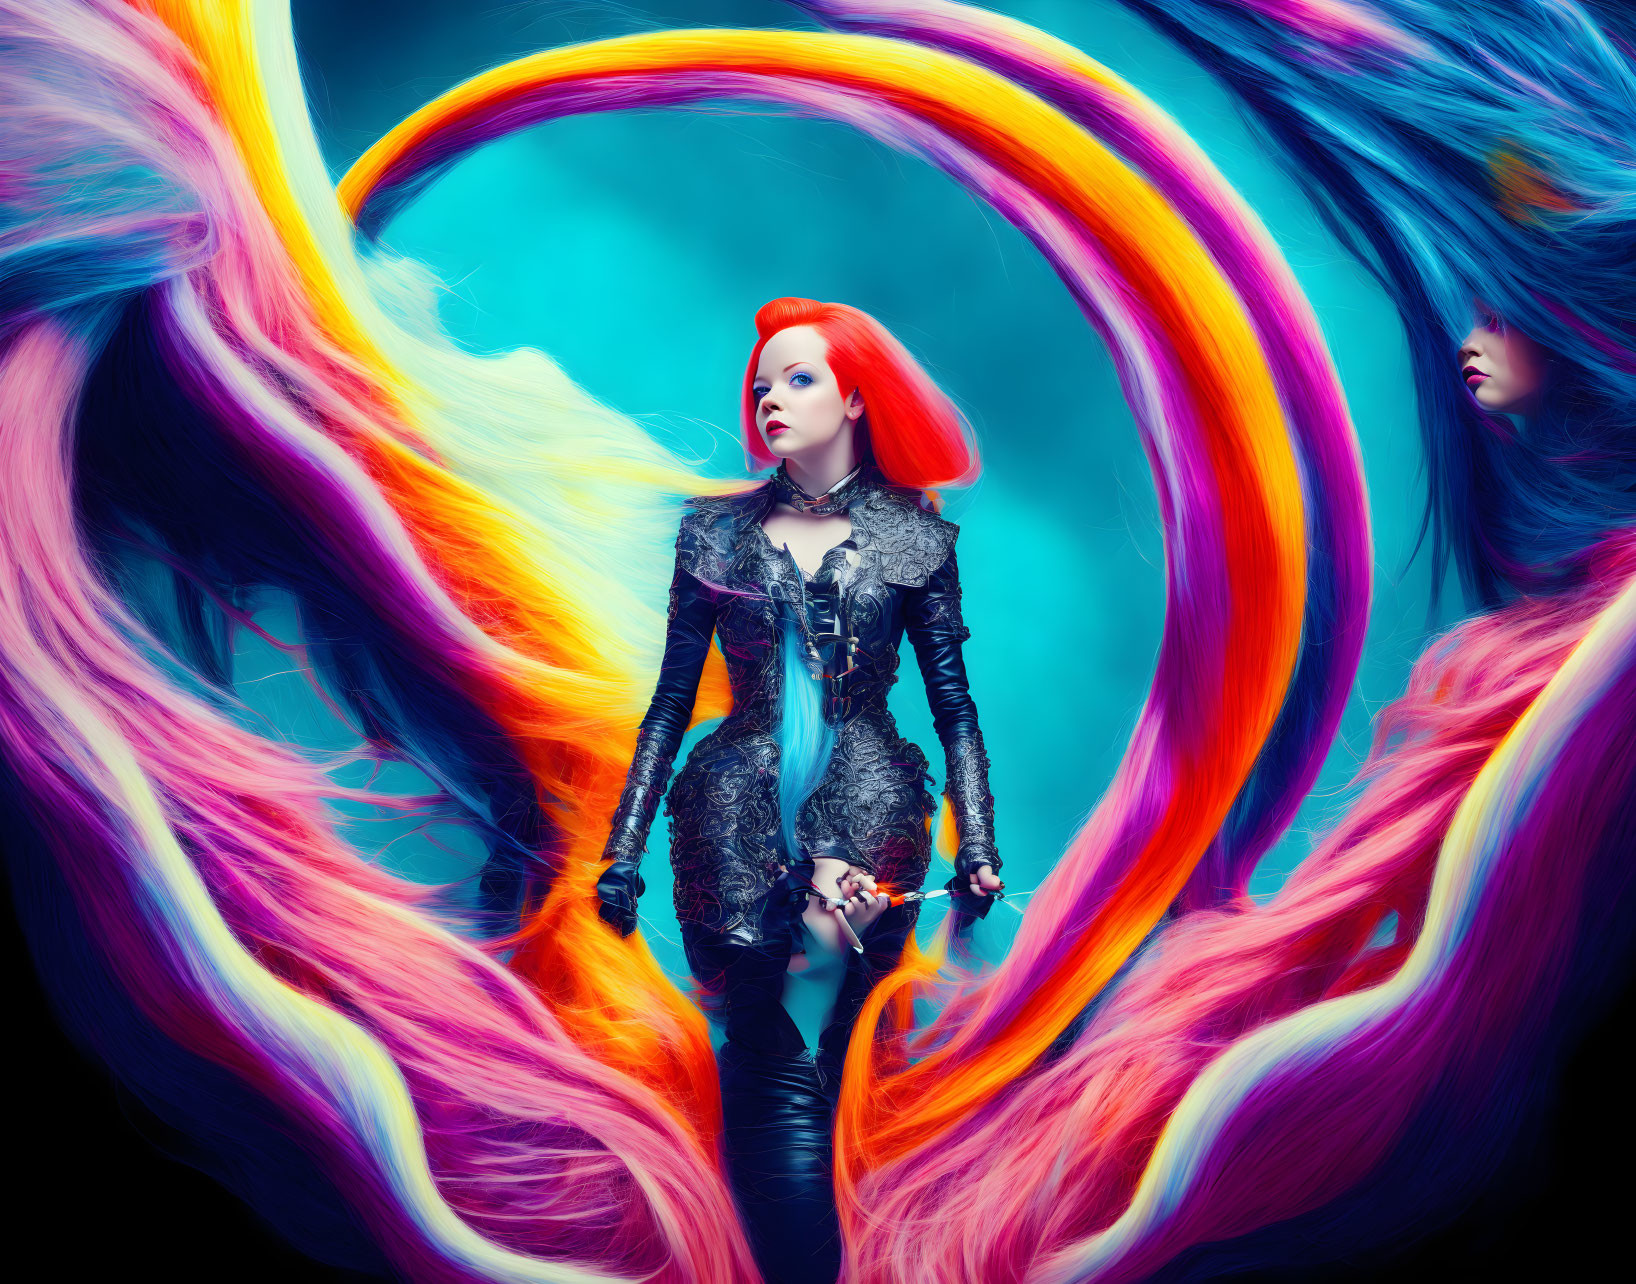 Vibrant red-haired woman in gothic attire amidst colorful swirls on blue backdrop